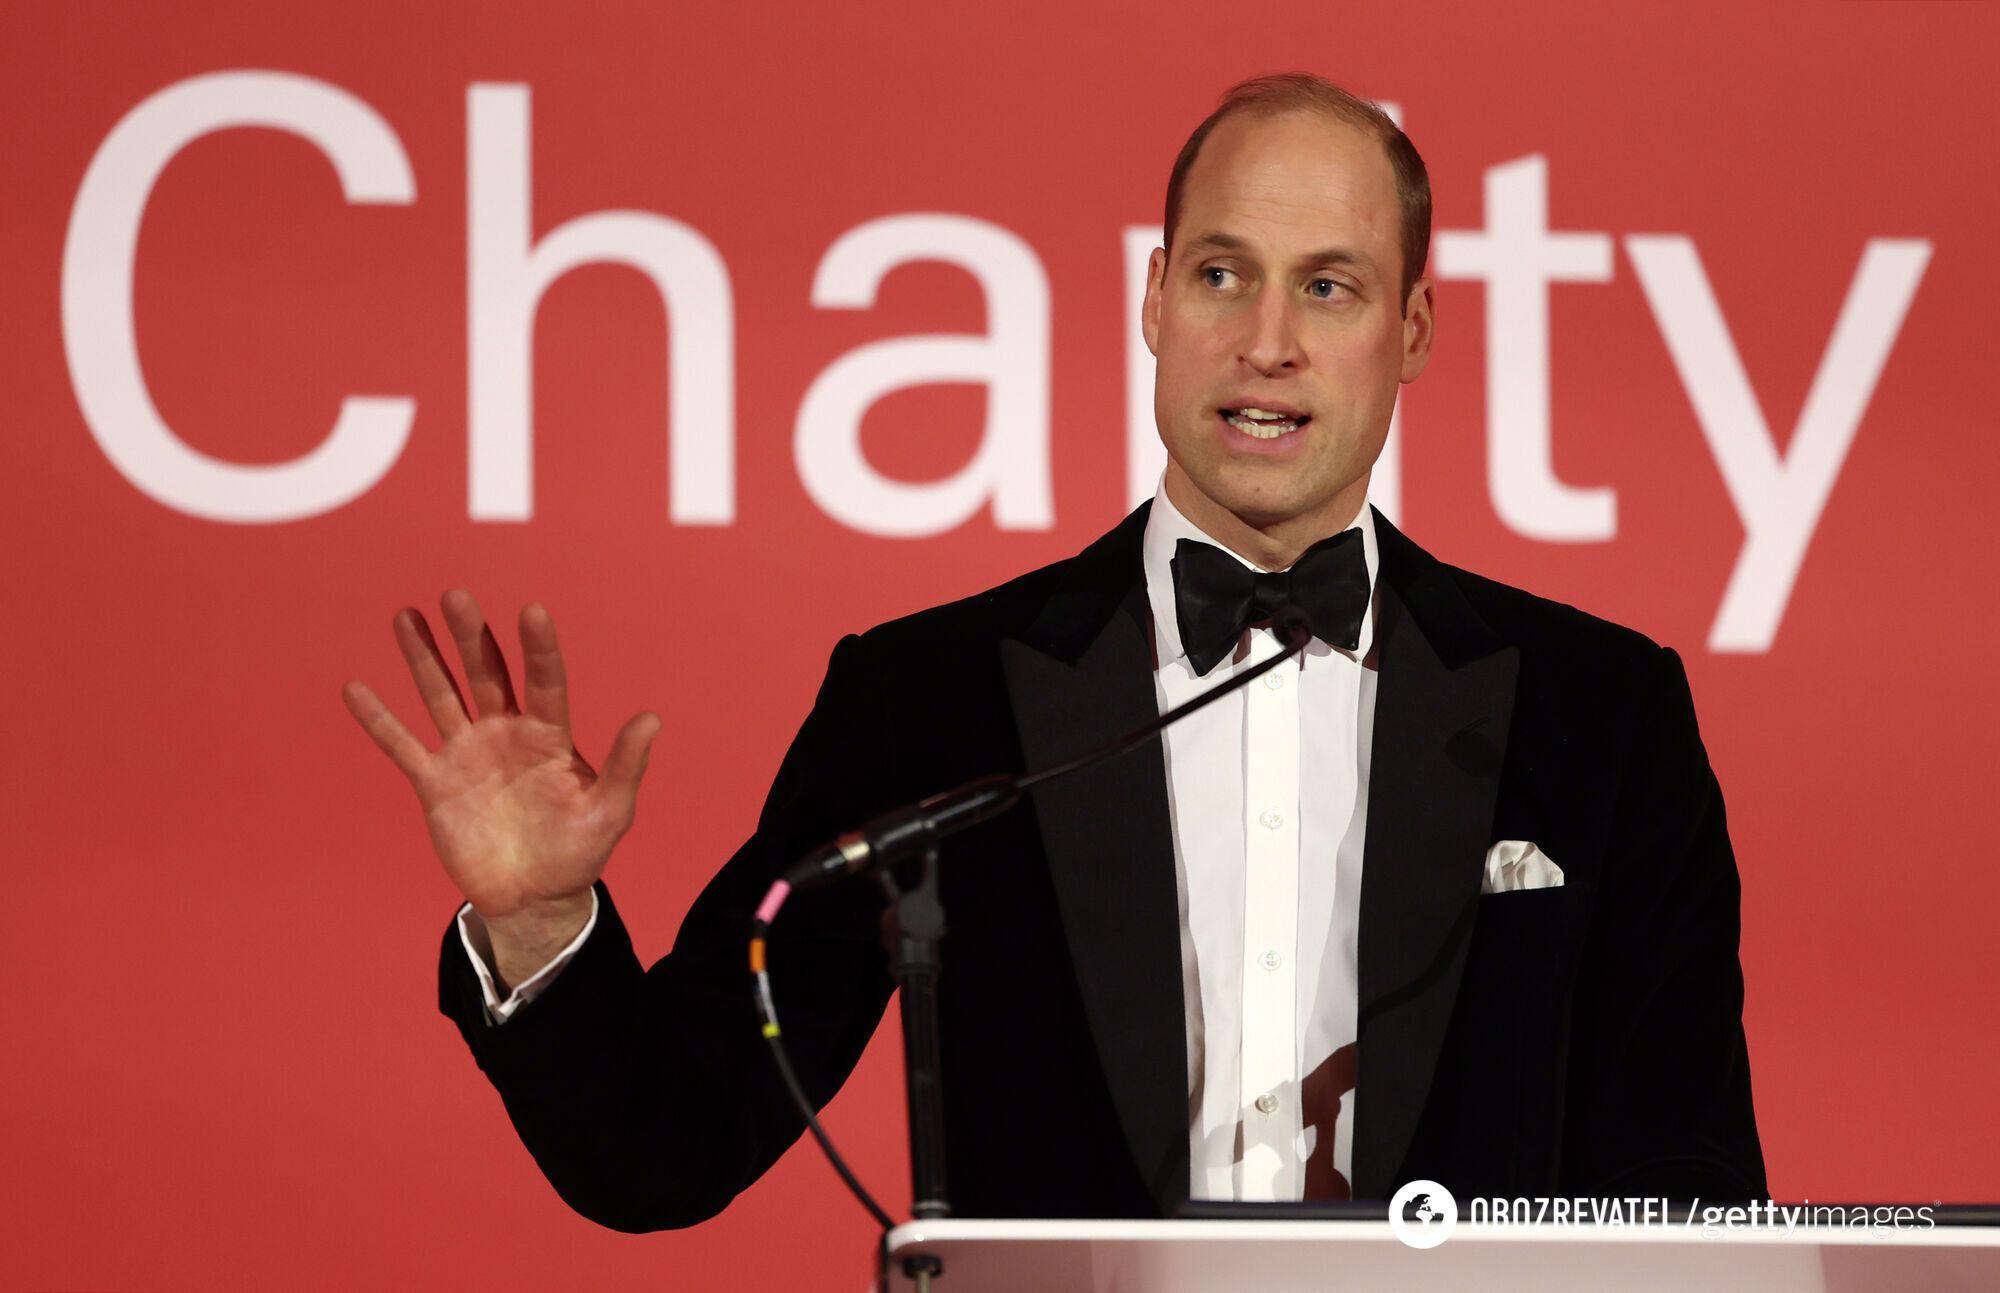 Prince William returned to royal duties for the first time after a pause and spoke about his father with cancer and his wife's surgery